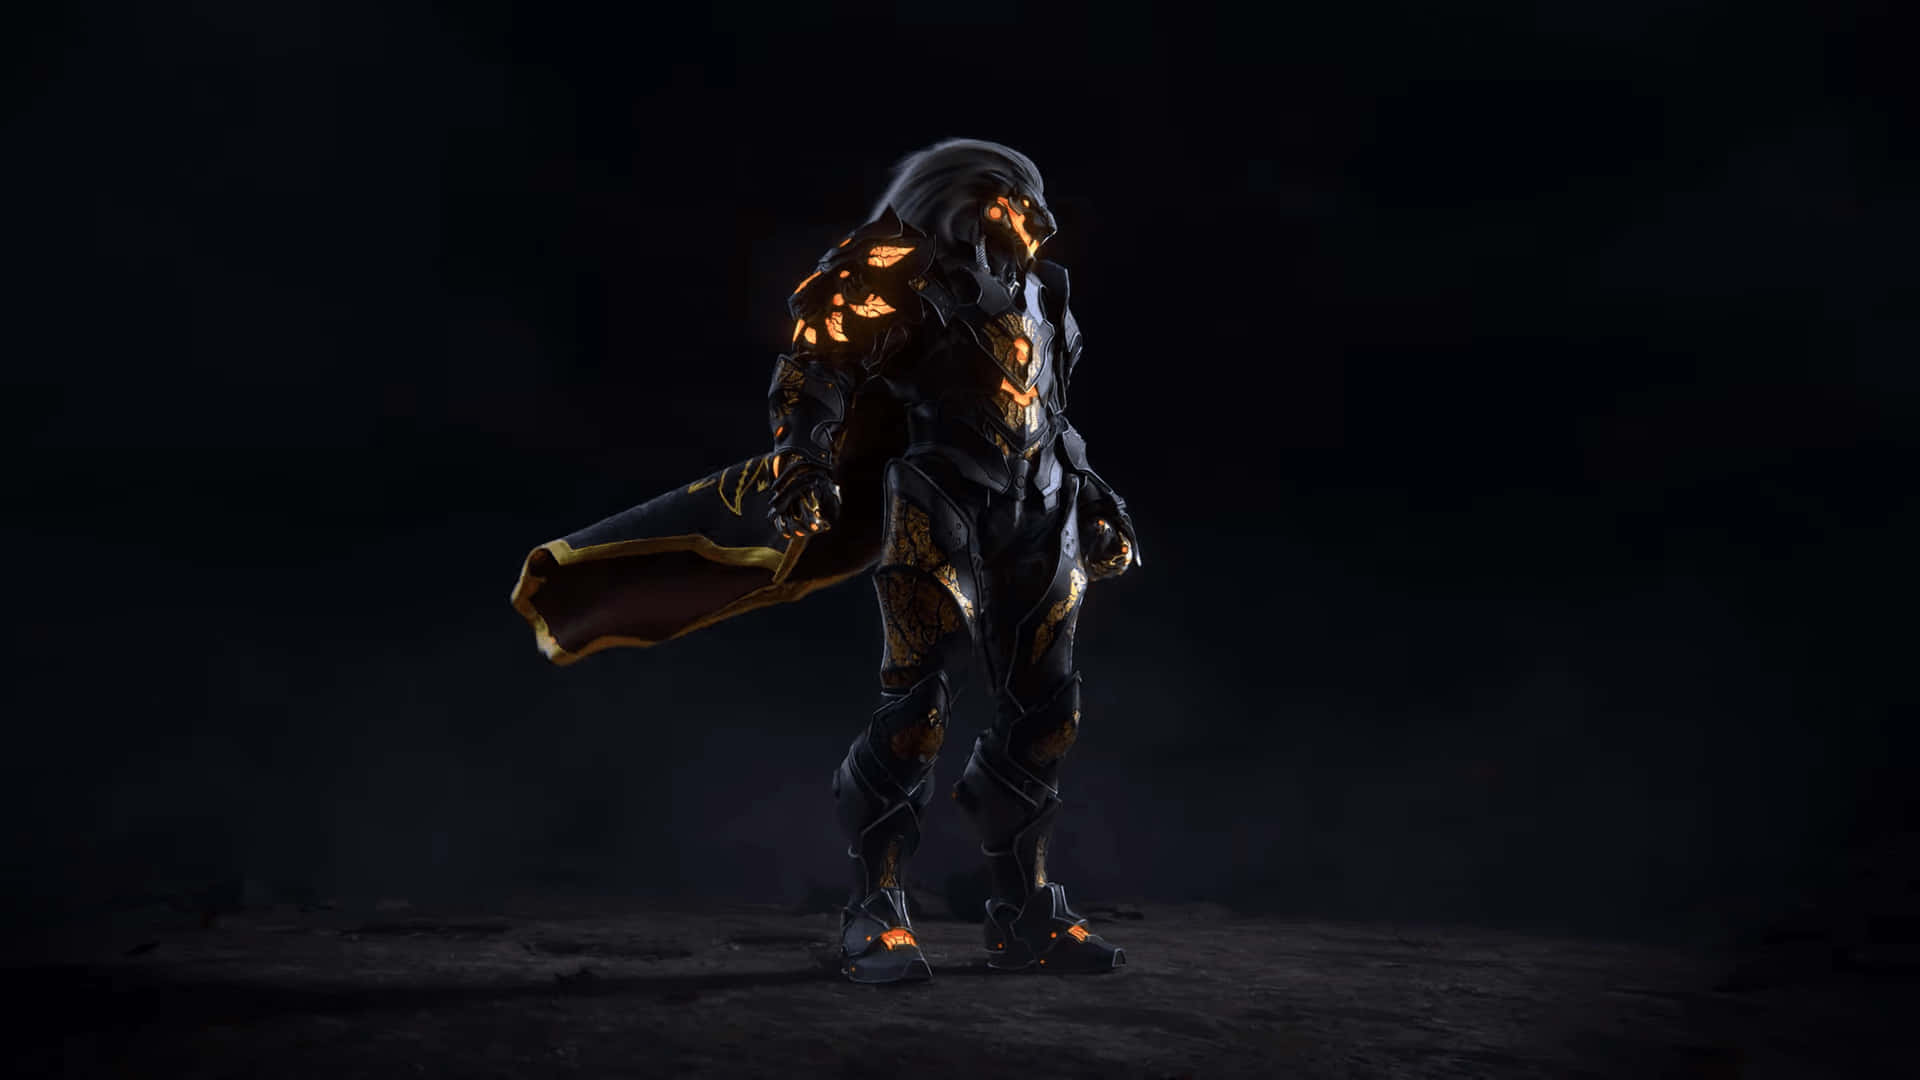 A Man In Armor Standing In The Dark